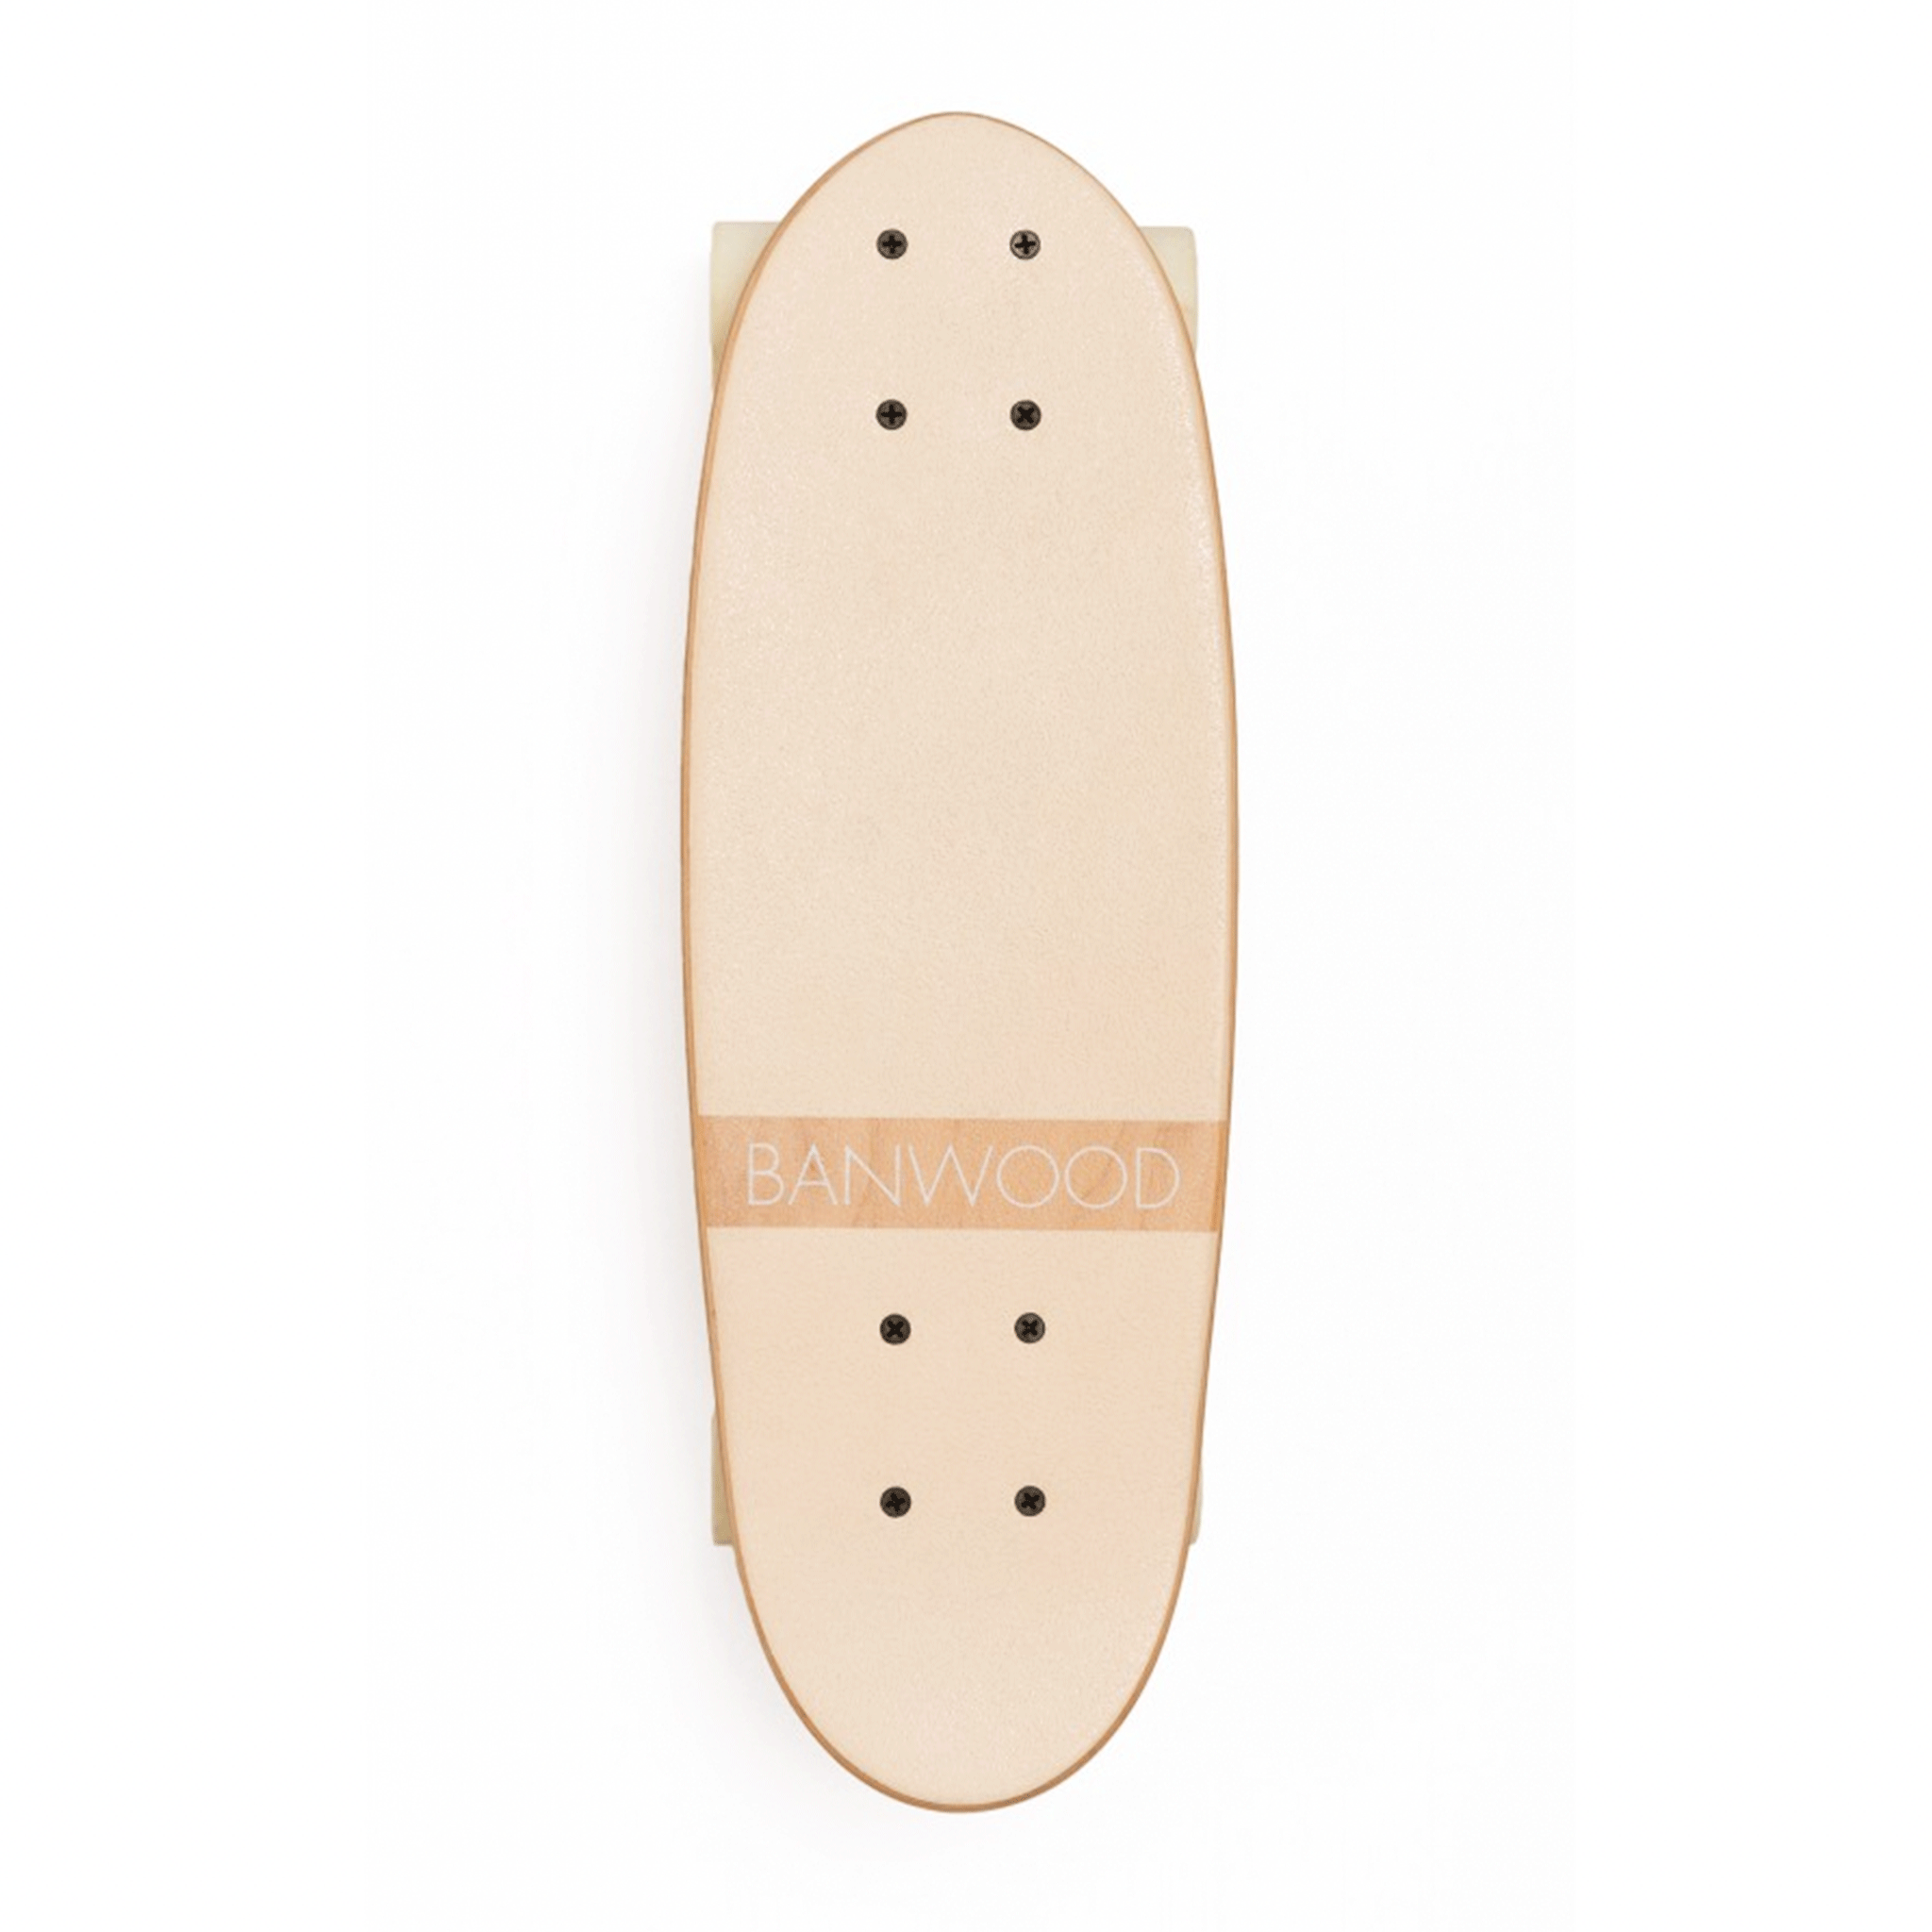 On a white background is a cream colored wood skateboard with white wheels.